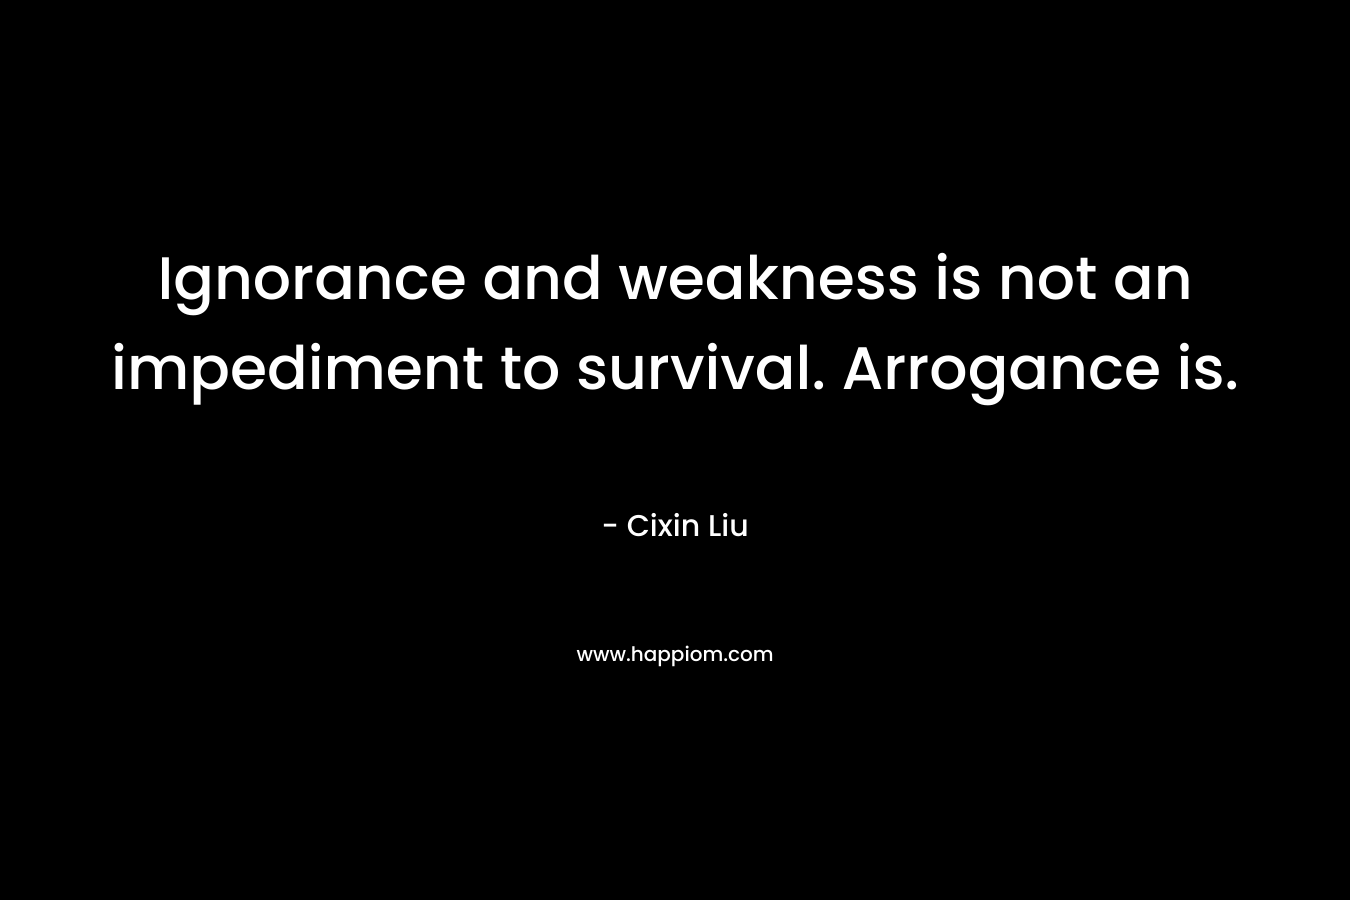 Ignorance and weakness is not an impediment to survival. Arrogance is. – Cixin Liu